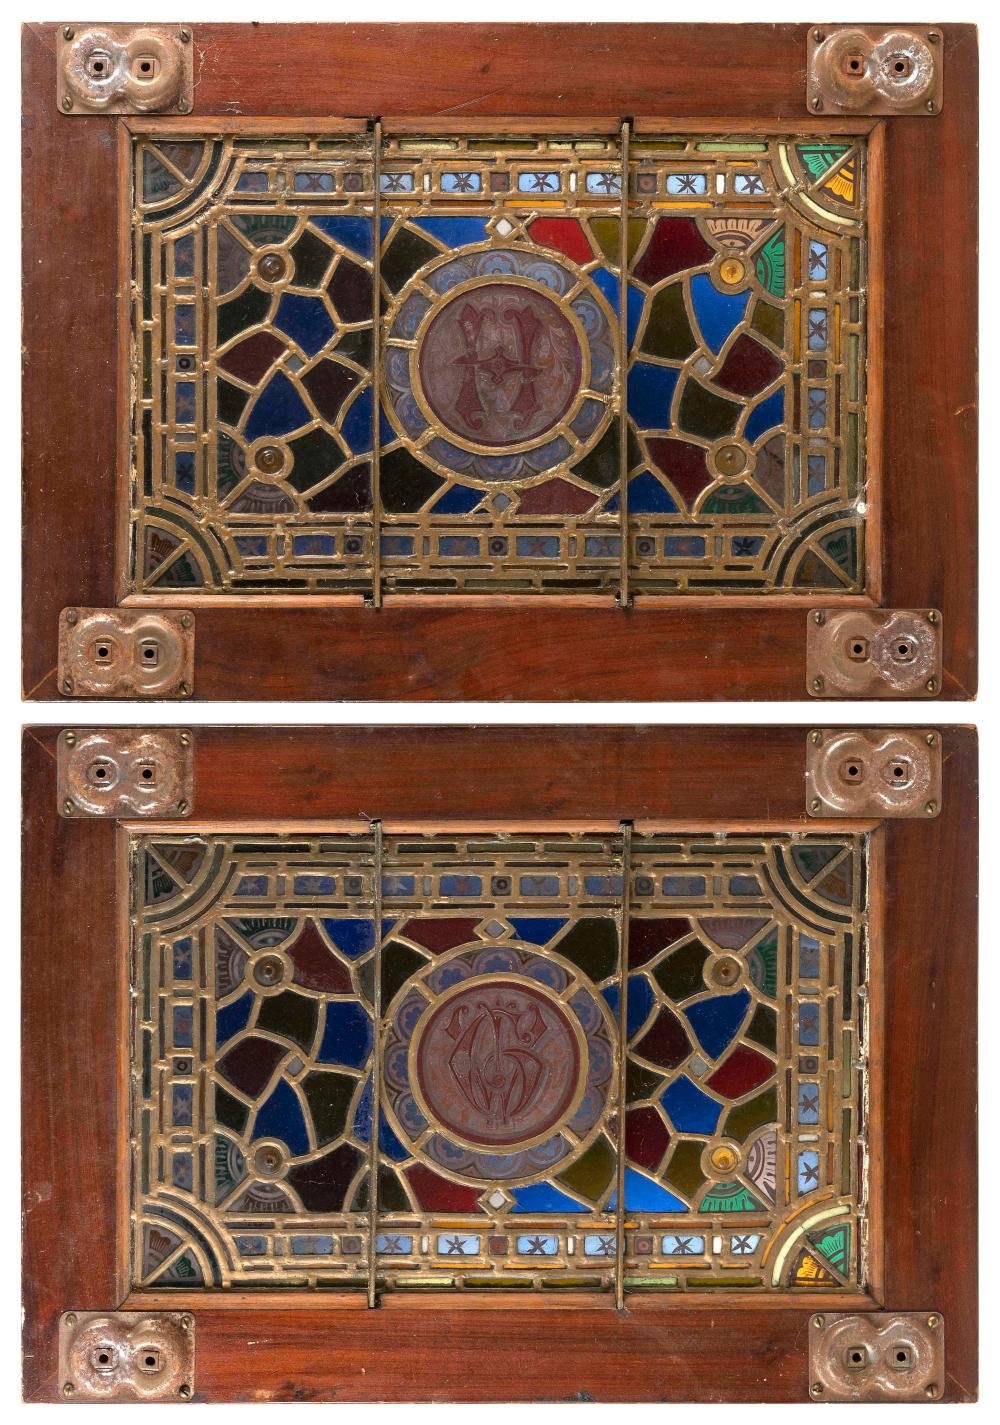 PAIR OF STAINED GLASS PANELS LATE